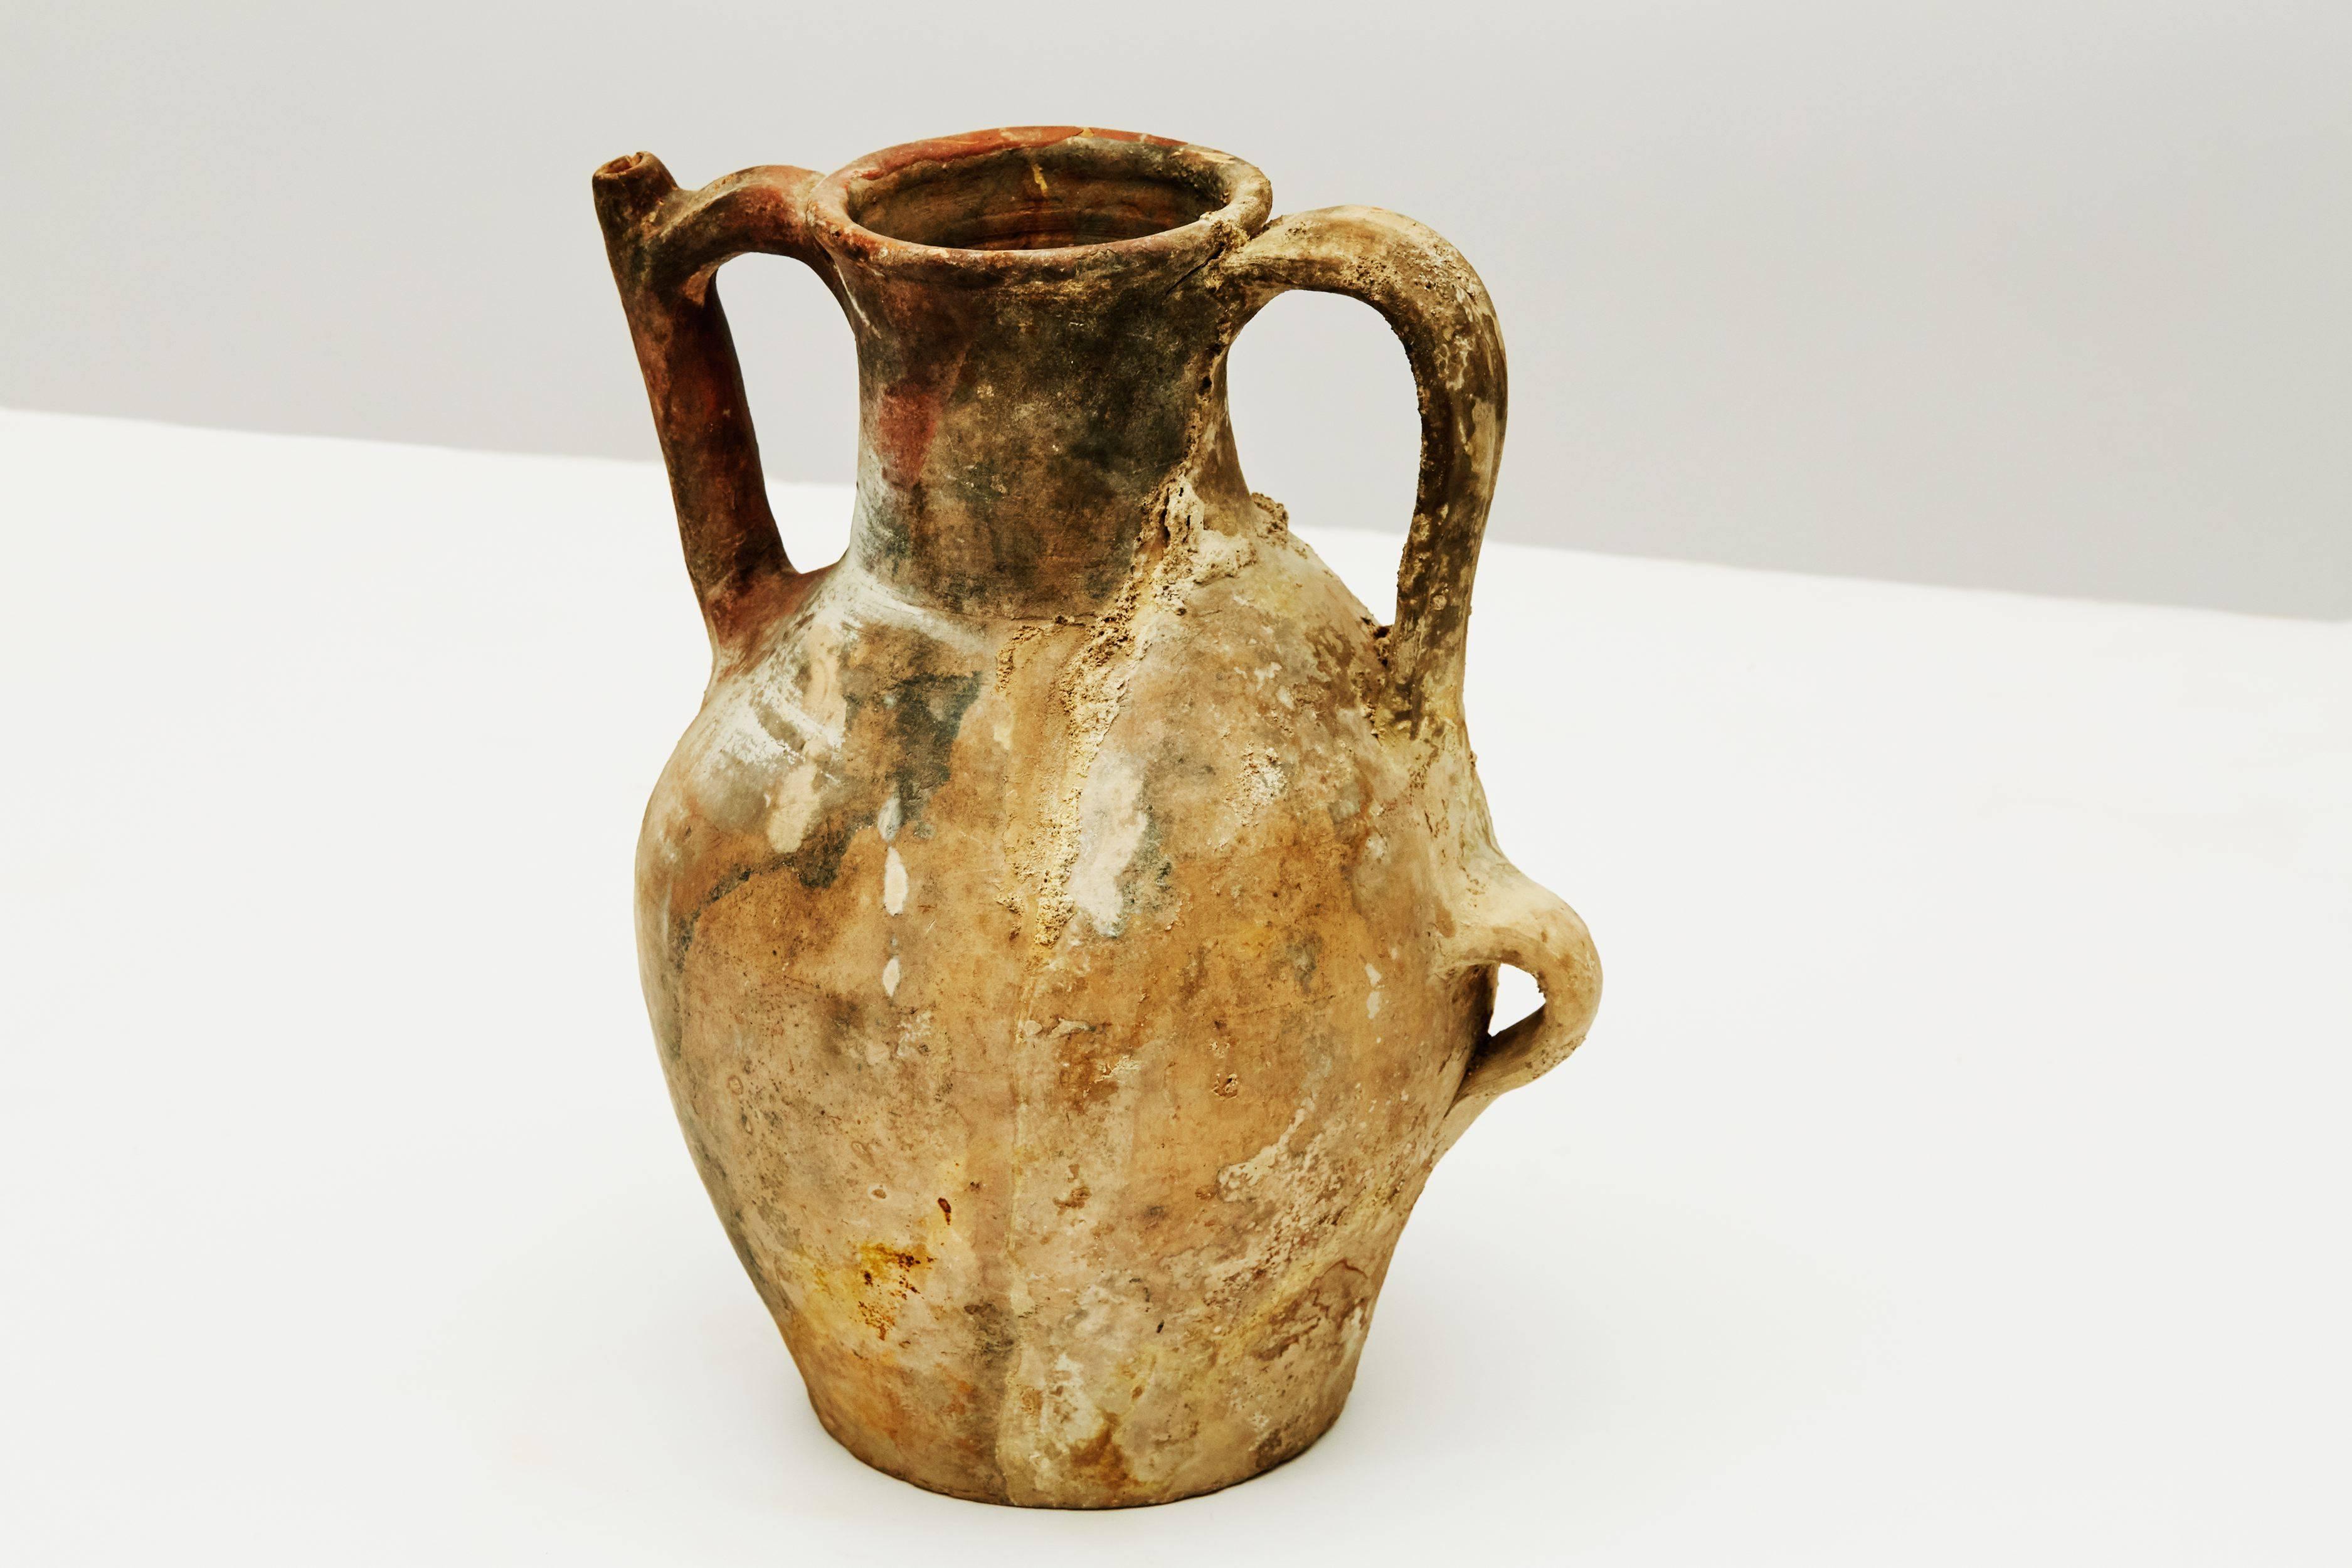 A ceramic jug hailing from Central Europe, and created in the mid-19th century, this piece, which was once held in famed designer Liz Claiborne's private collection, is glazed in earth tones, constructed with two handles, and possesses a long,